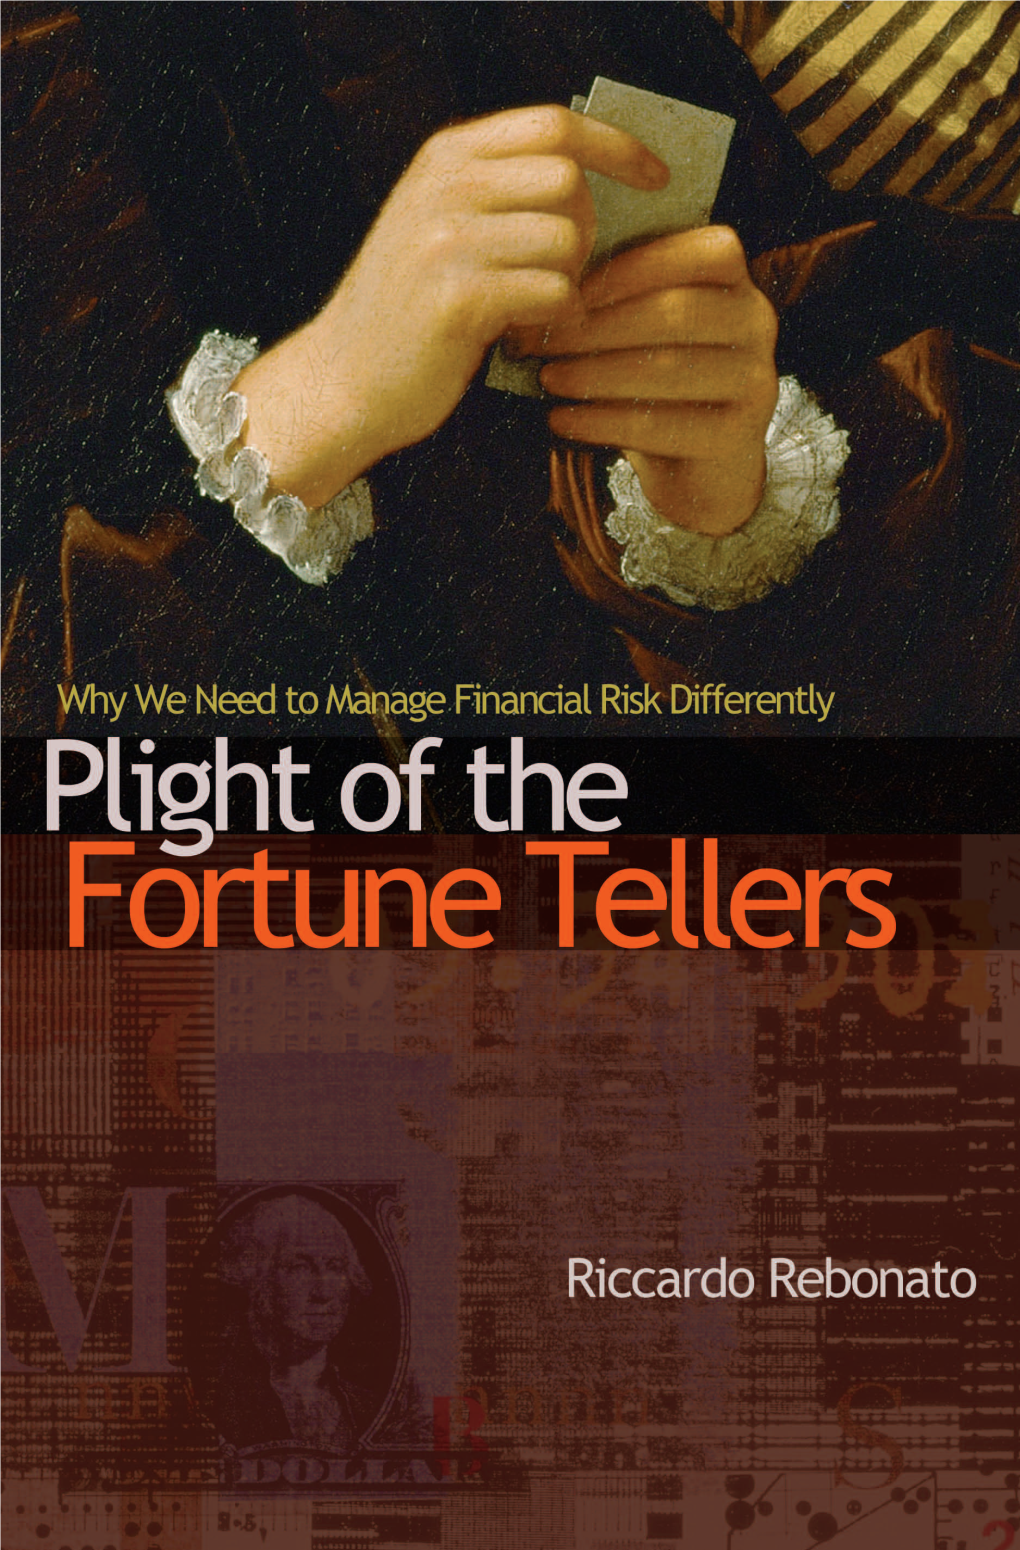 Plight of the Fortune Tellers: Why We Need to Manage Financial Risk